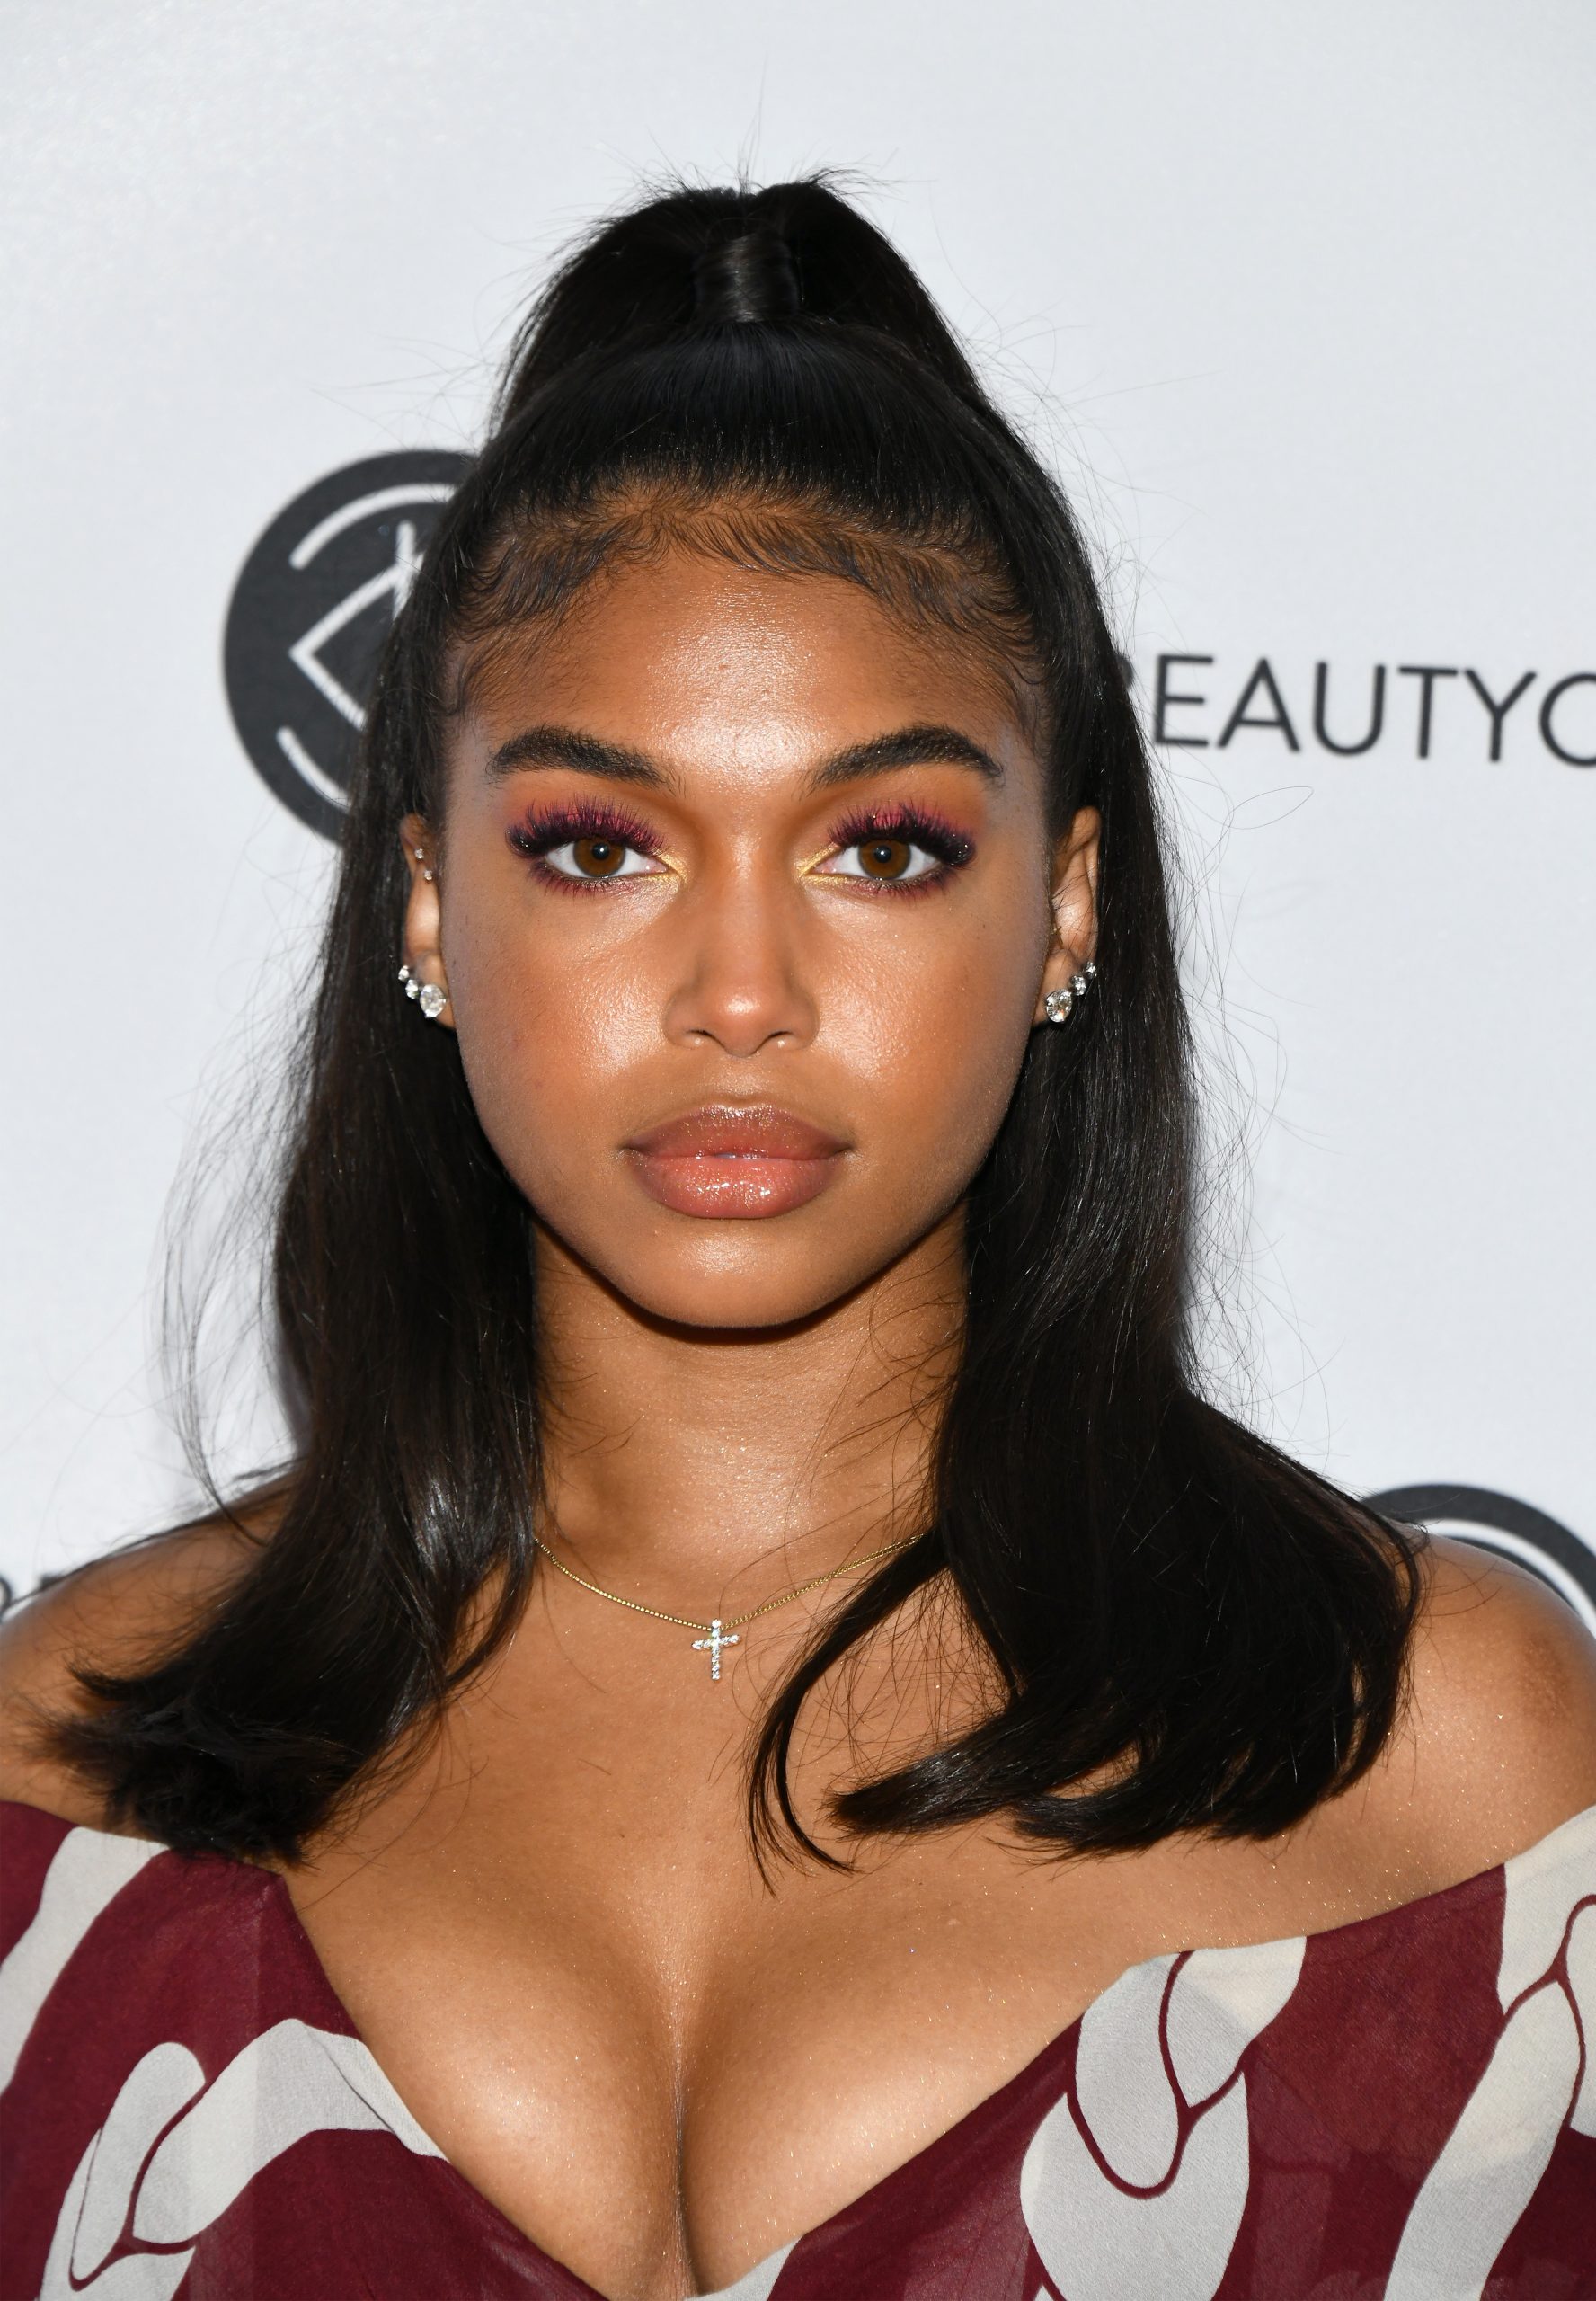 Michael B. Jordan and Girlfriend Lori Harvey 'Wanted to Get to Know Each  Other in Private': Source